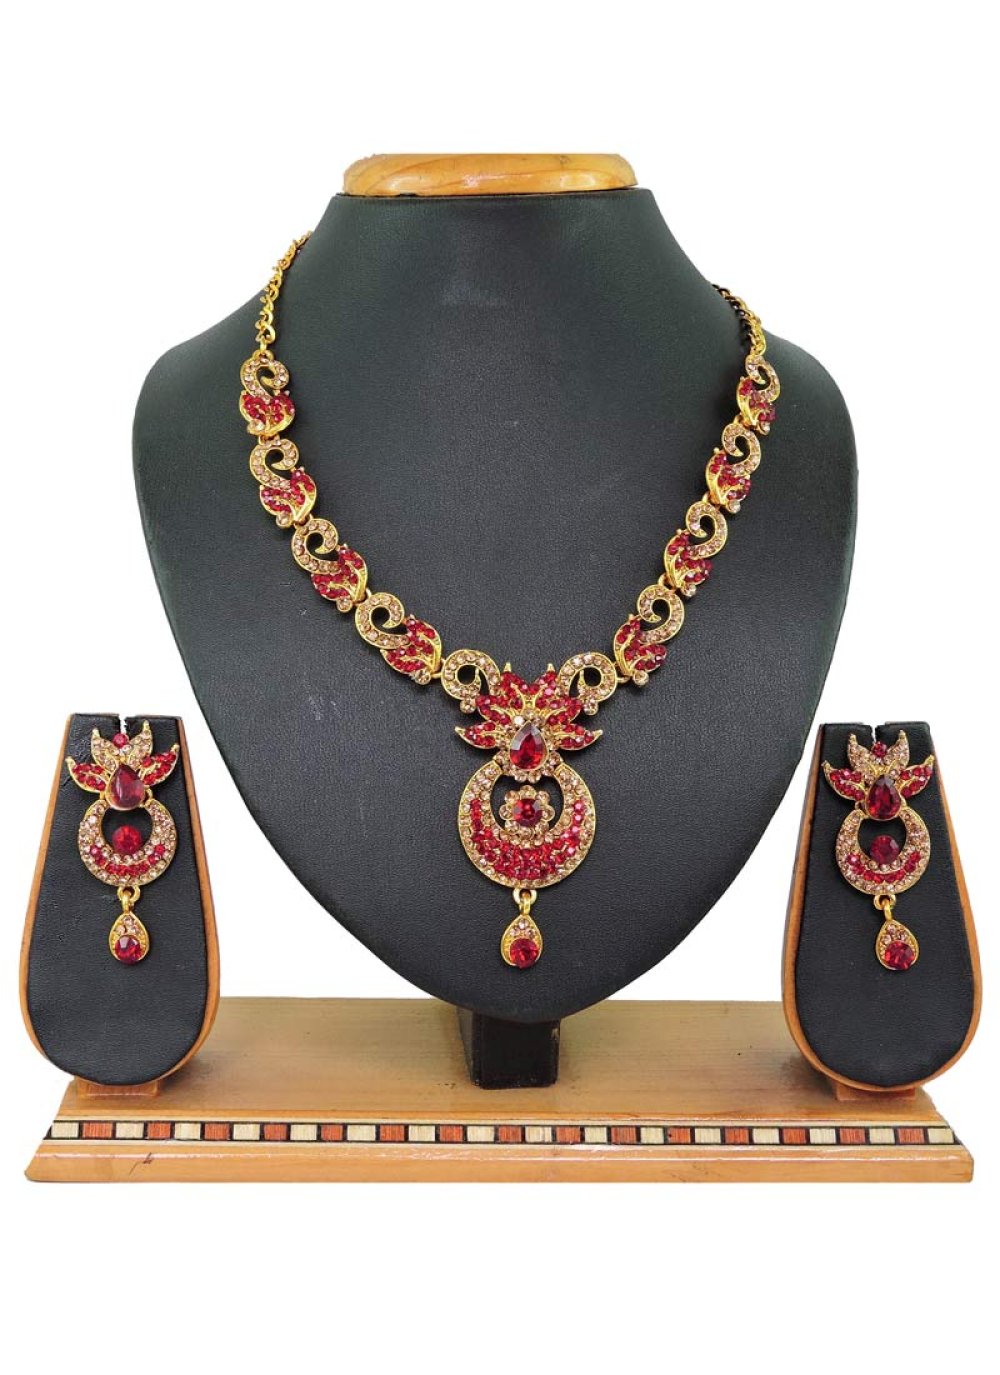 Sumptuous Gold Rodium Polish Beads Work Alloy Gold and Red Necklace Set For Ceremonial